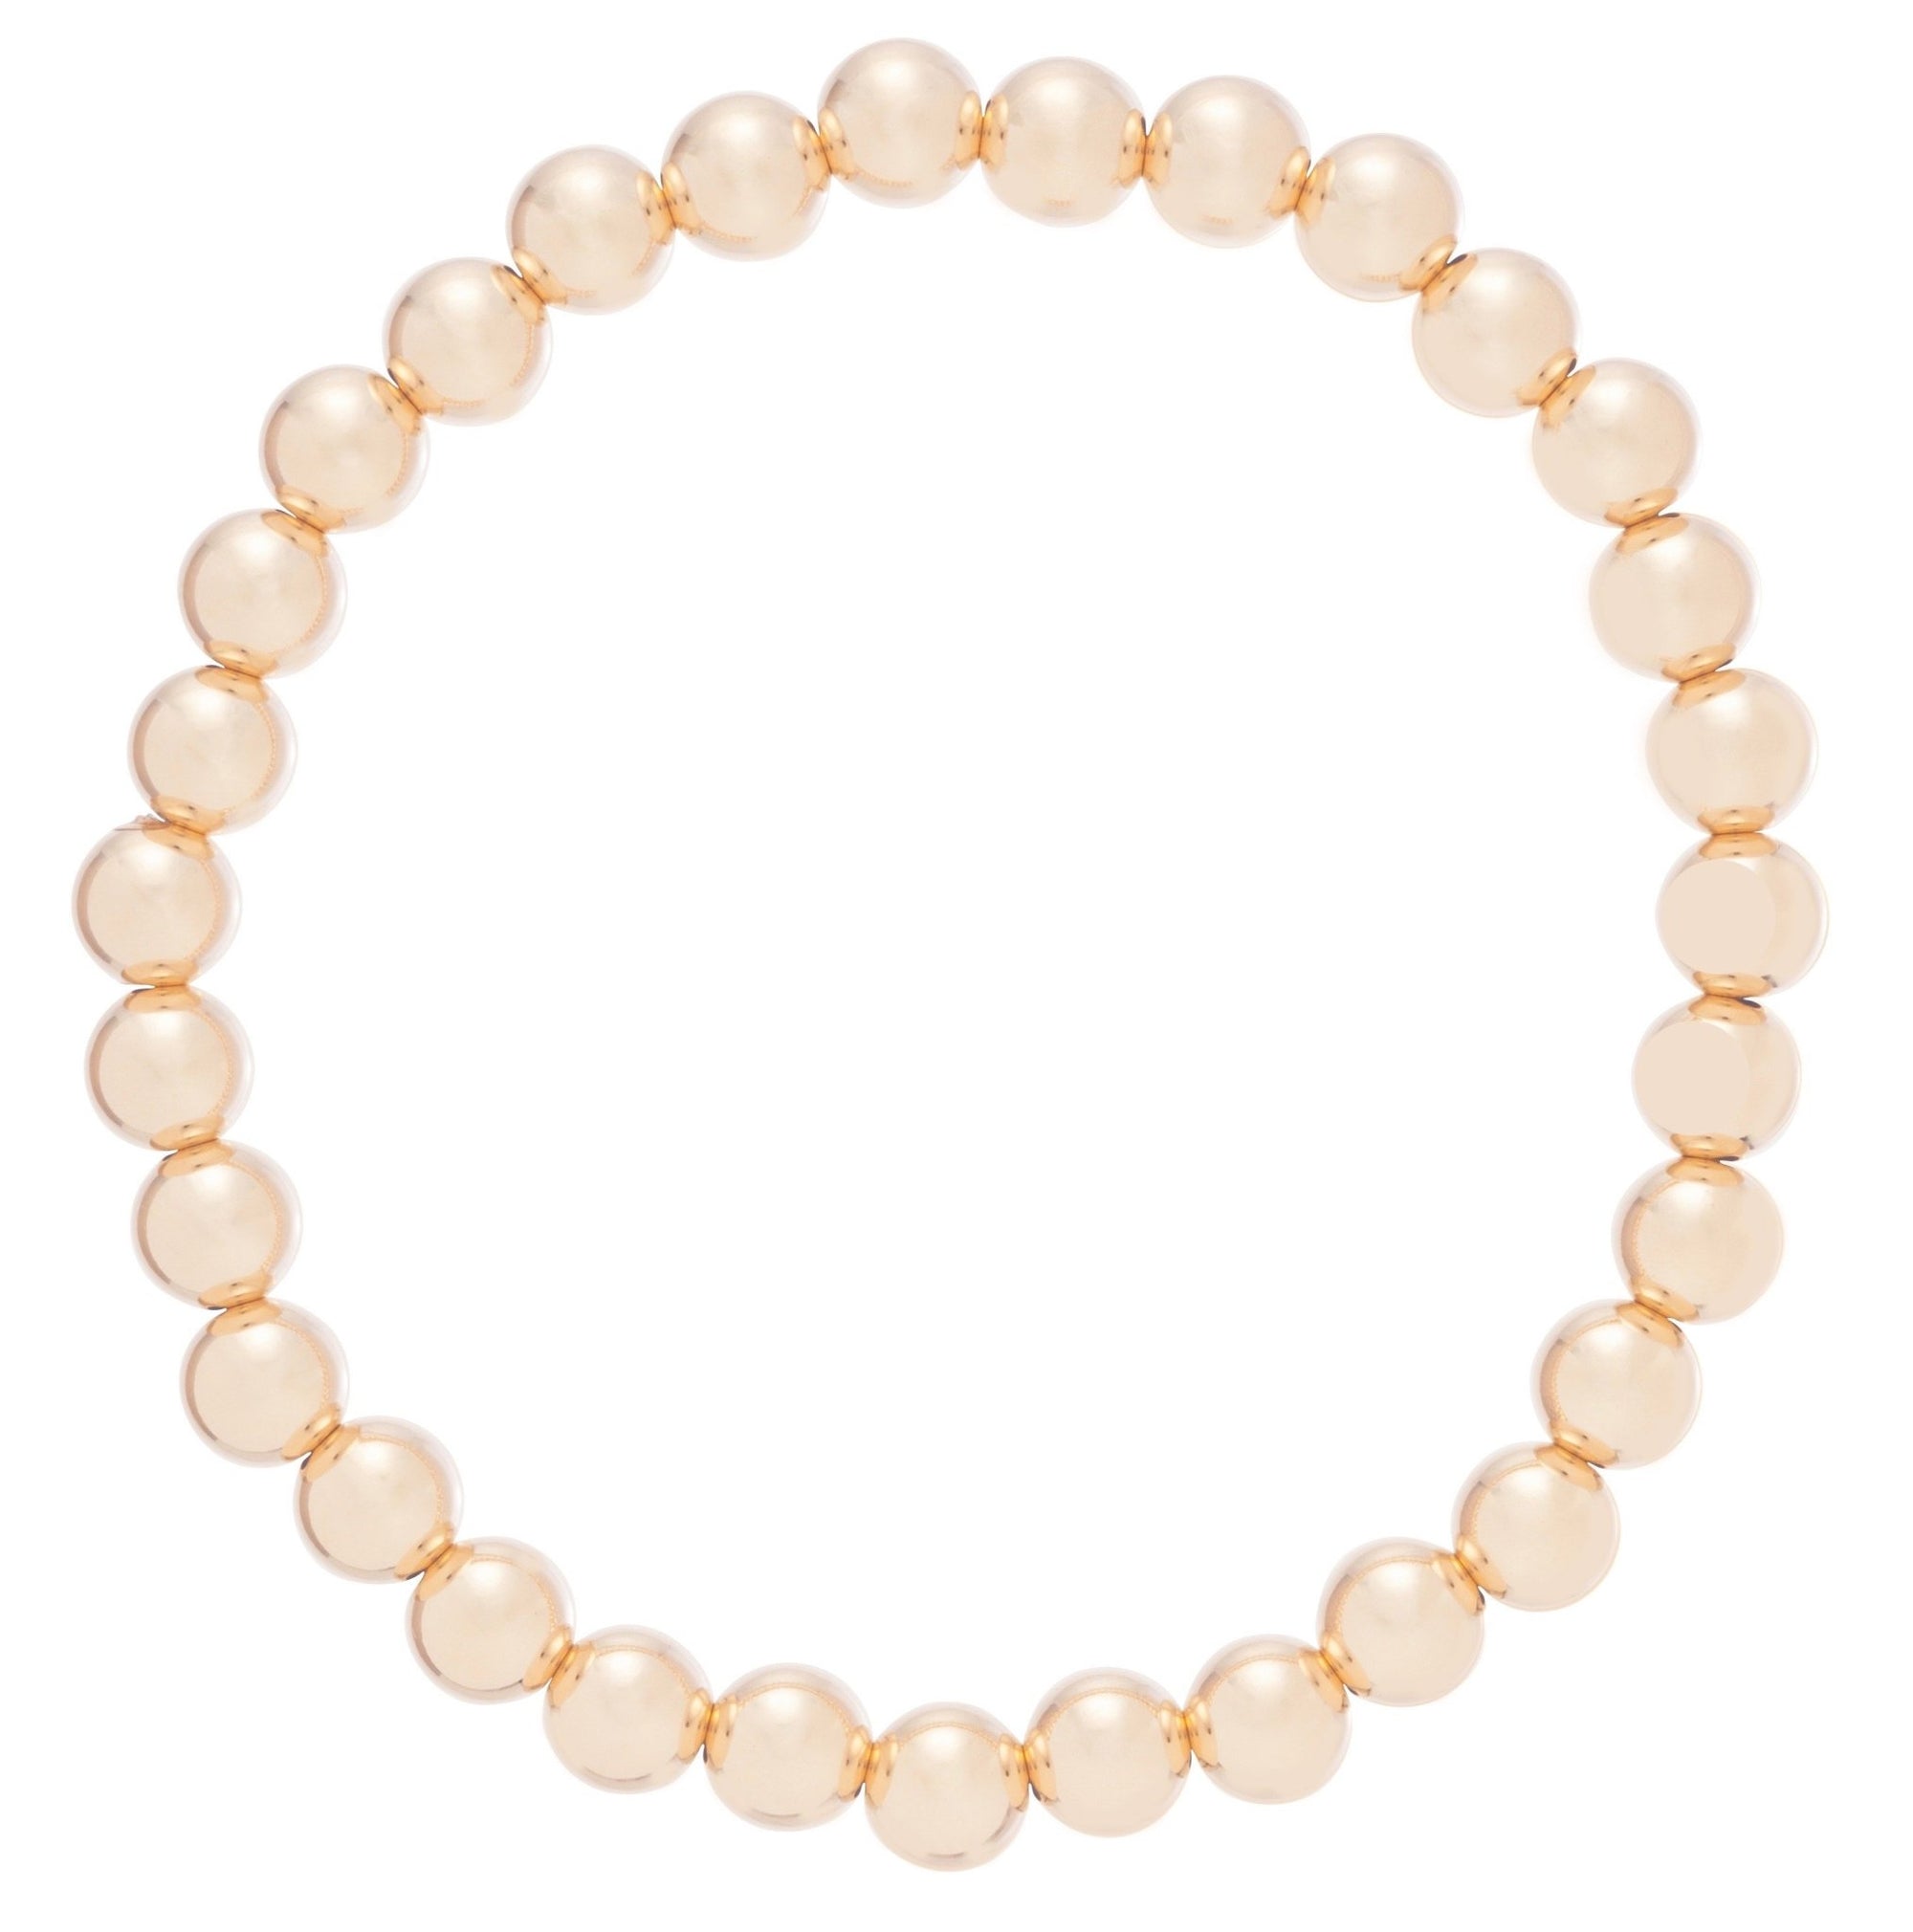 CLASSIC GOLD 5MM BEAD BRACELET - Molly's! A Chic and Unique Boutique 